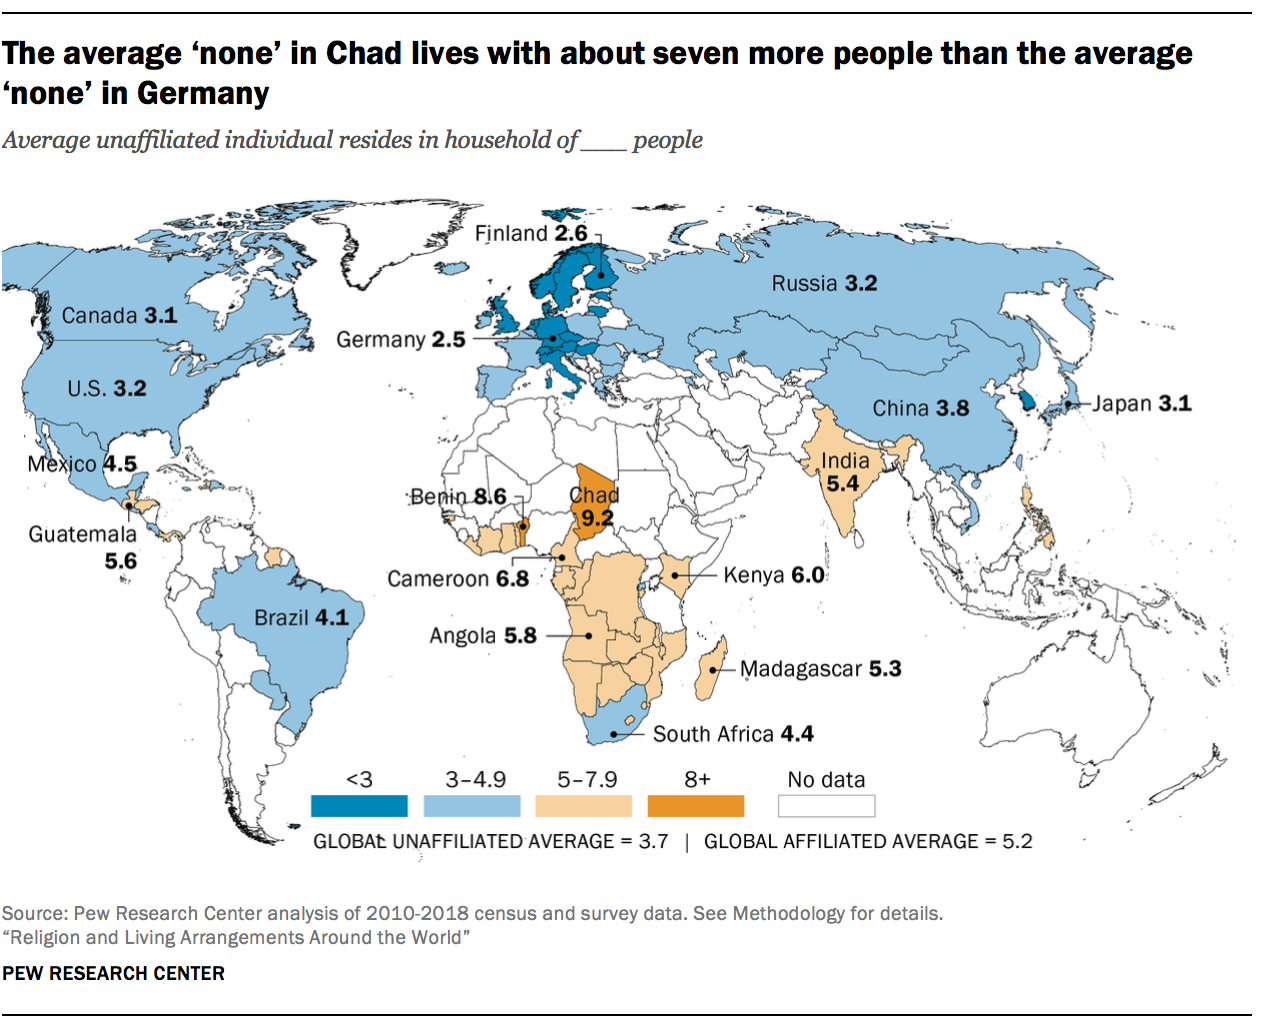 The average ‘none’ in Chad lives with about seven more people than the average ‘none’ in Germany